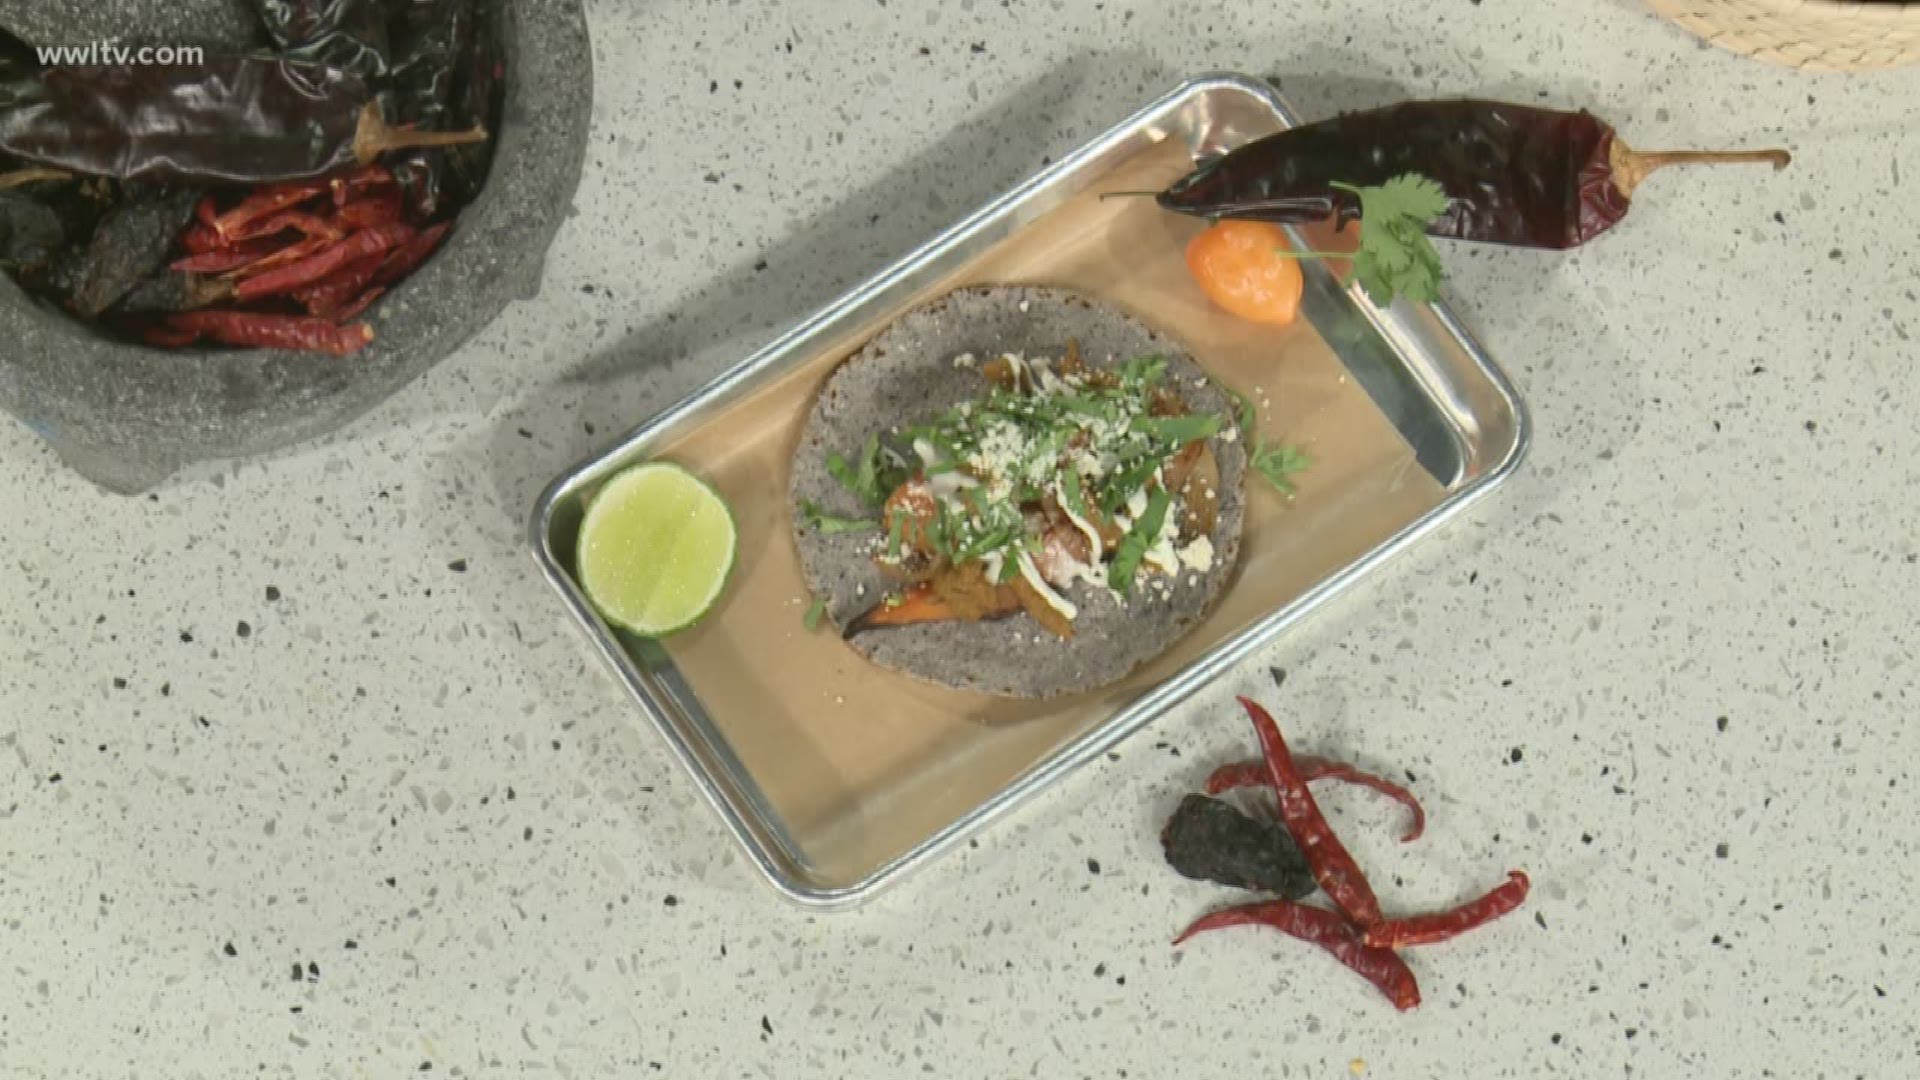 Brett Jones from Barracuda is giving us a taste of one of the restaurant's vegetarian-friendly options Sweet Potato Habenero tacos.